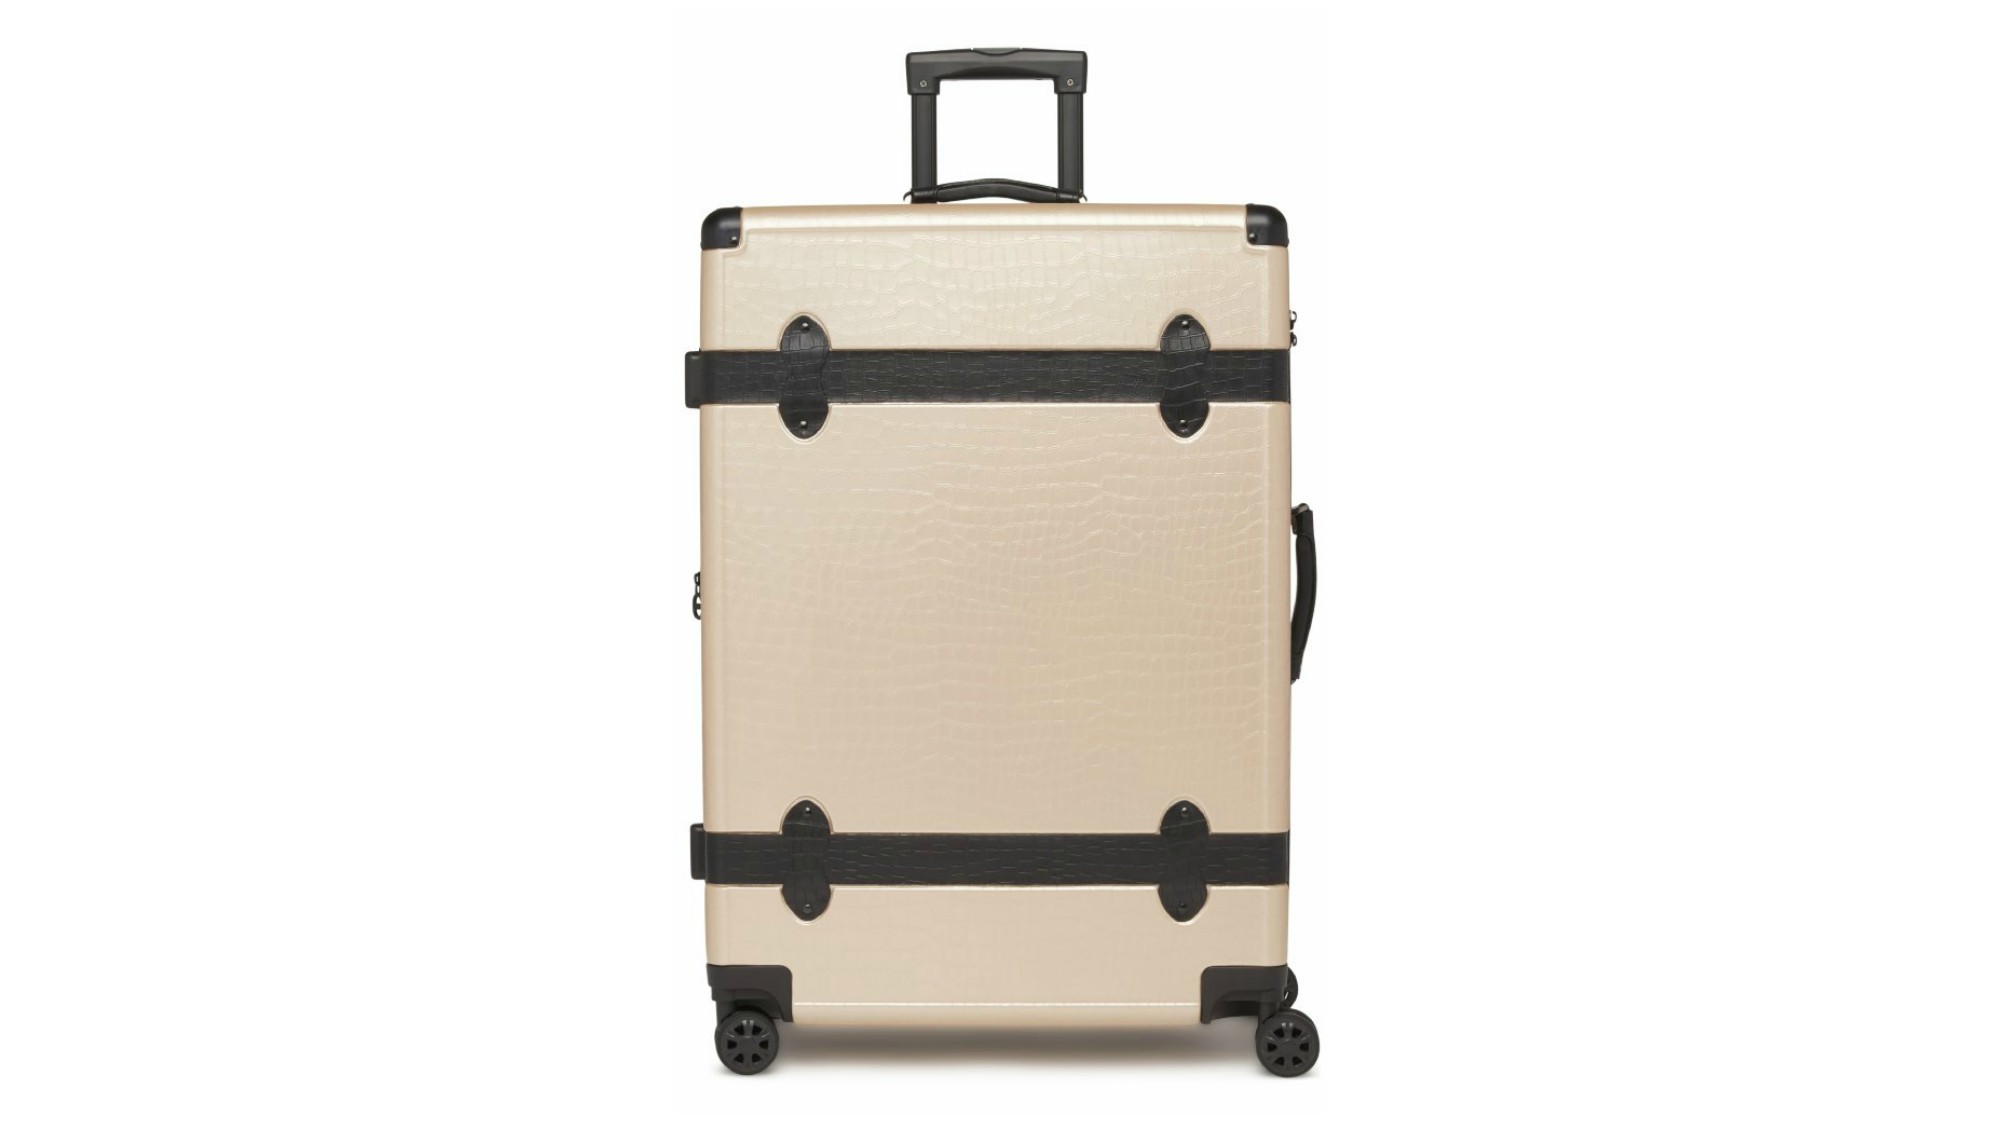 Funaro F&c 623 Detail Parts Suitcase Luggage Bags Purse Attache Case Baggage for sale online 